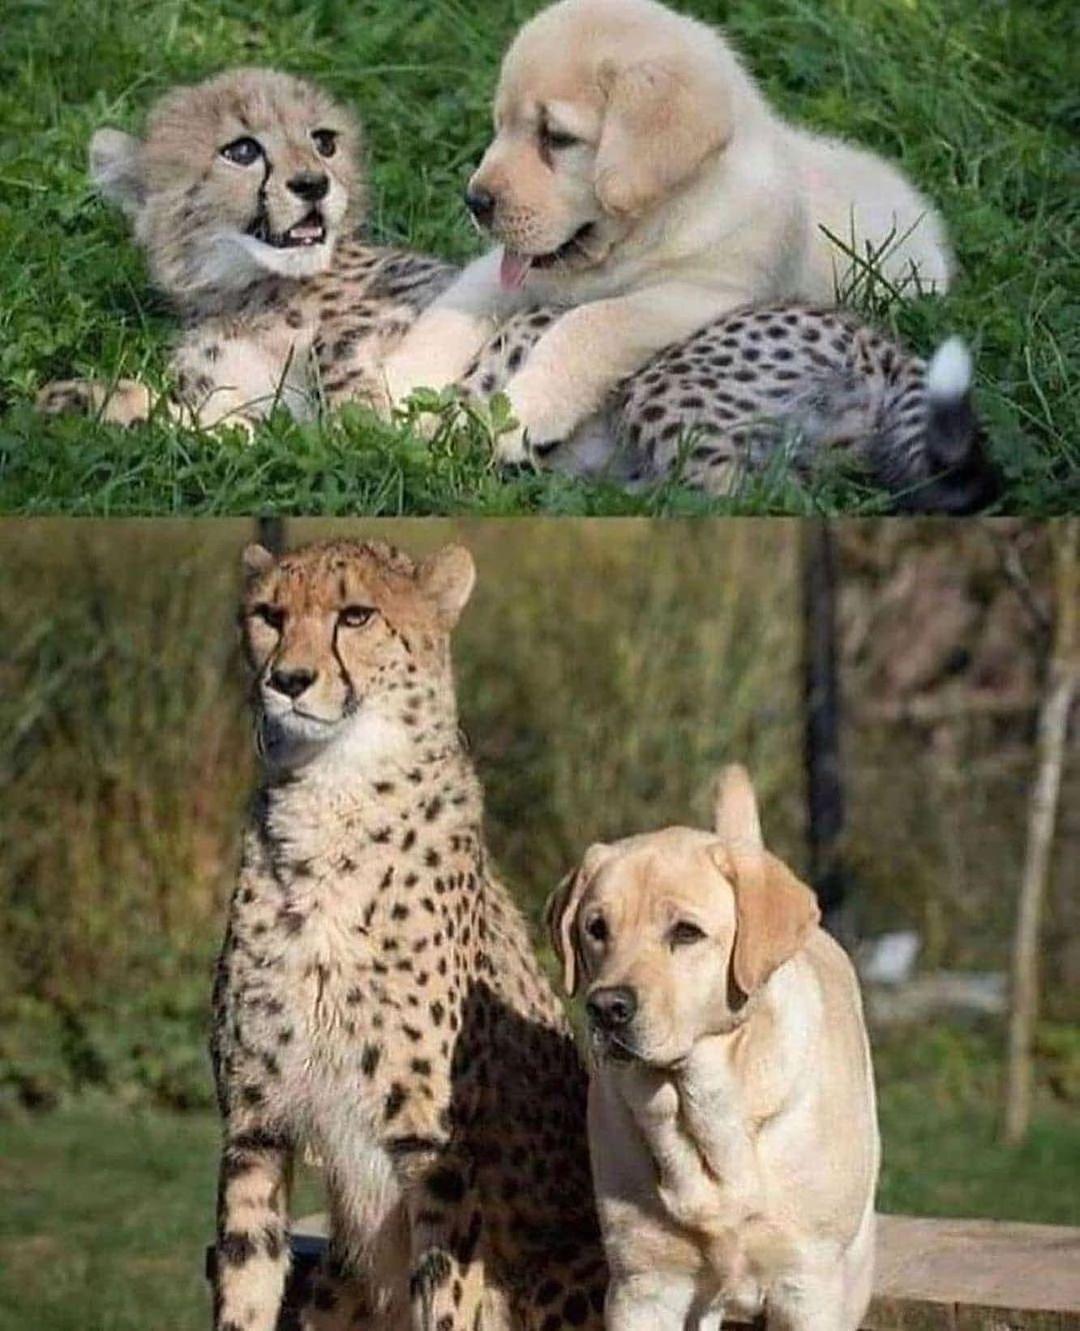 cheetahs are naturally nervous